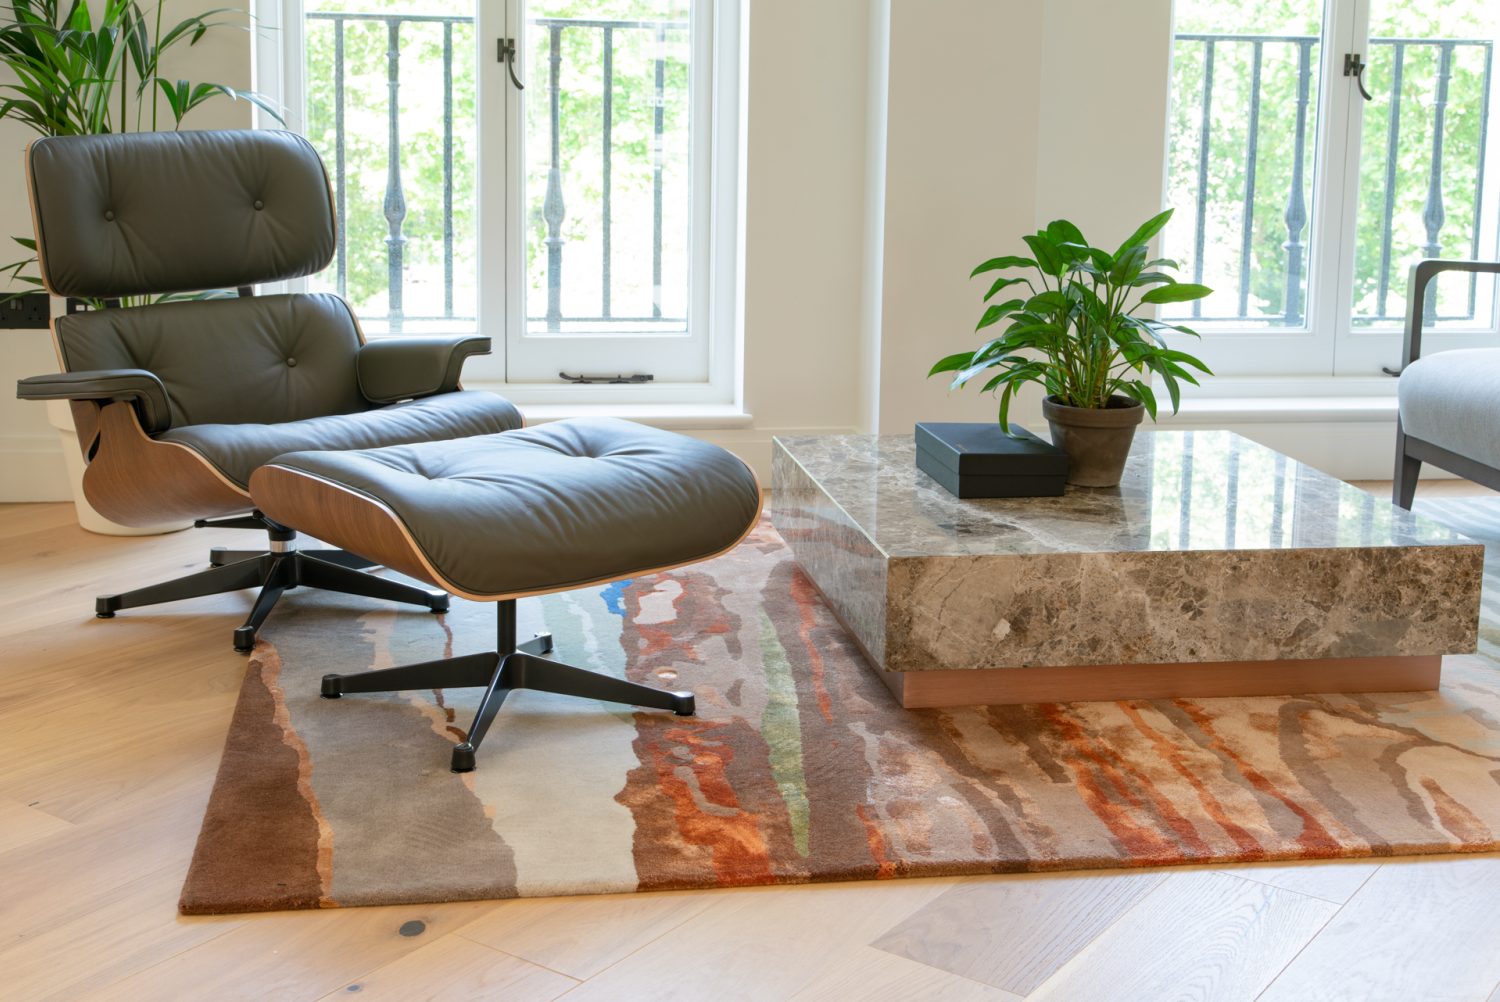 Rug placed in its new home in Teck's new London'-based office